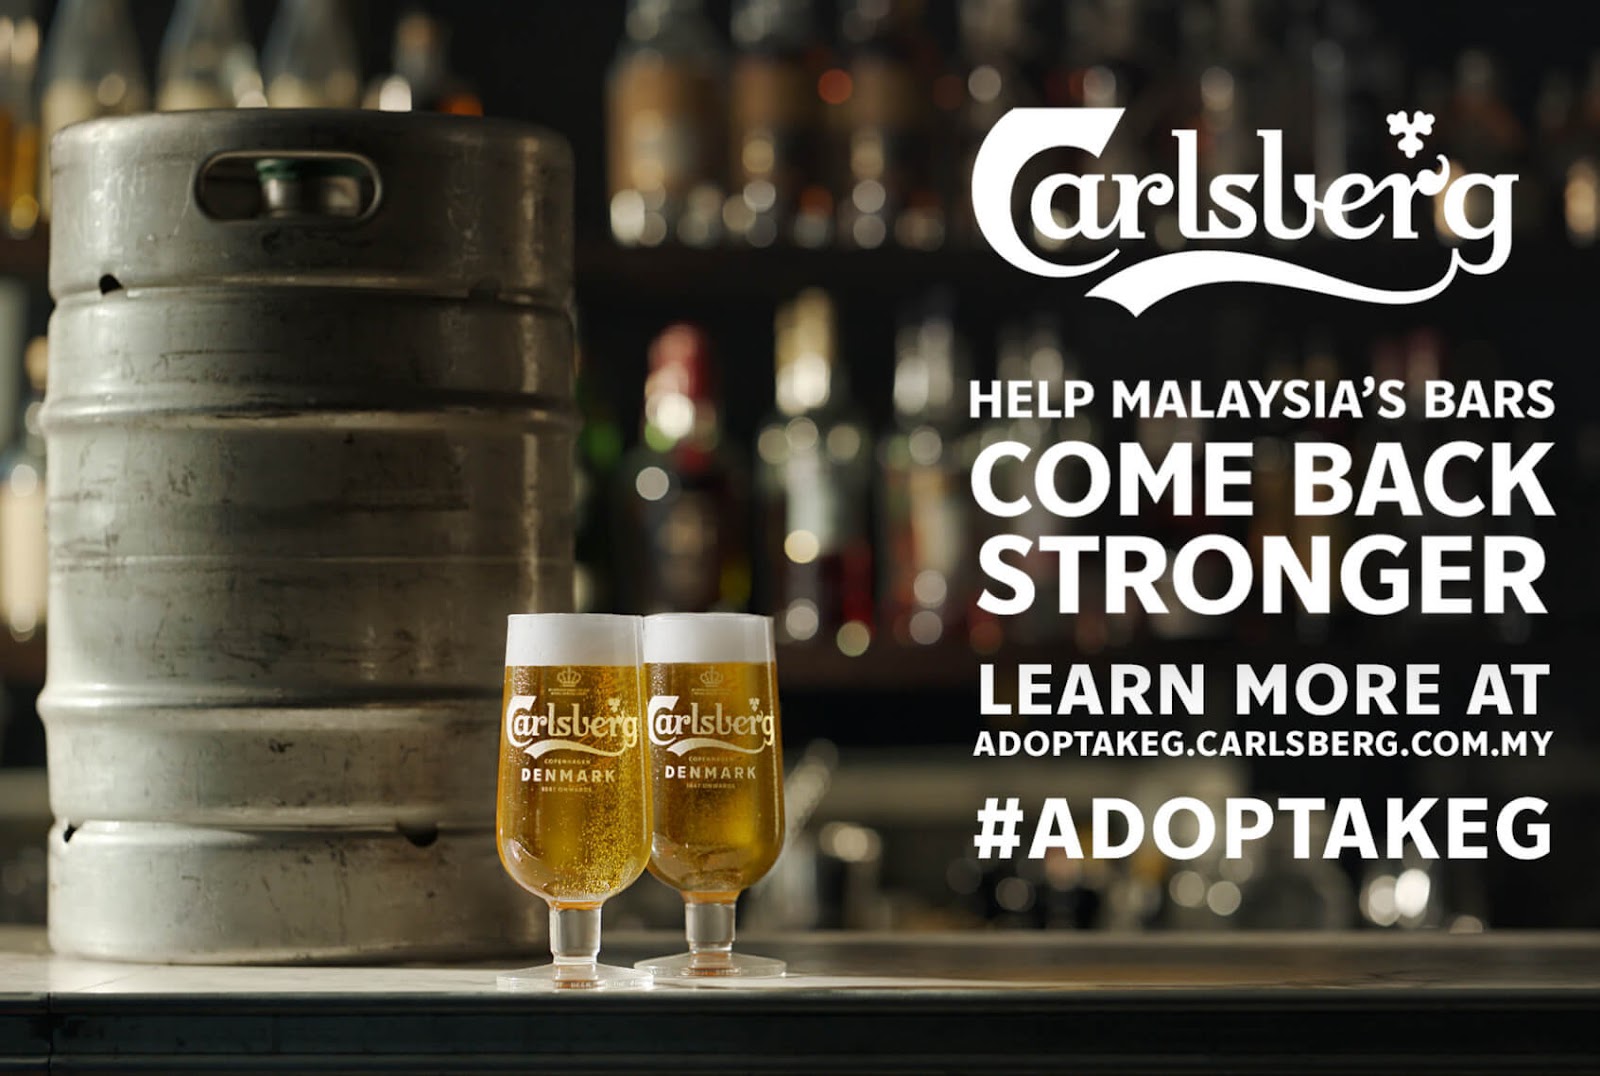 A banner from Carlsberg’s “Adopt a Keg” Campaign